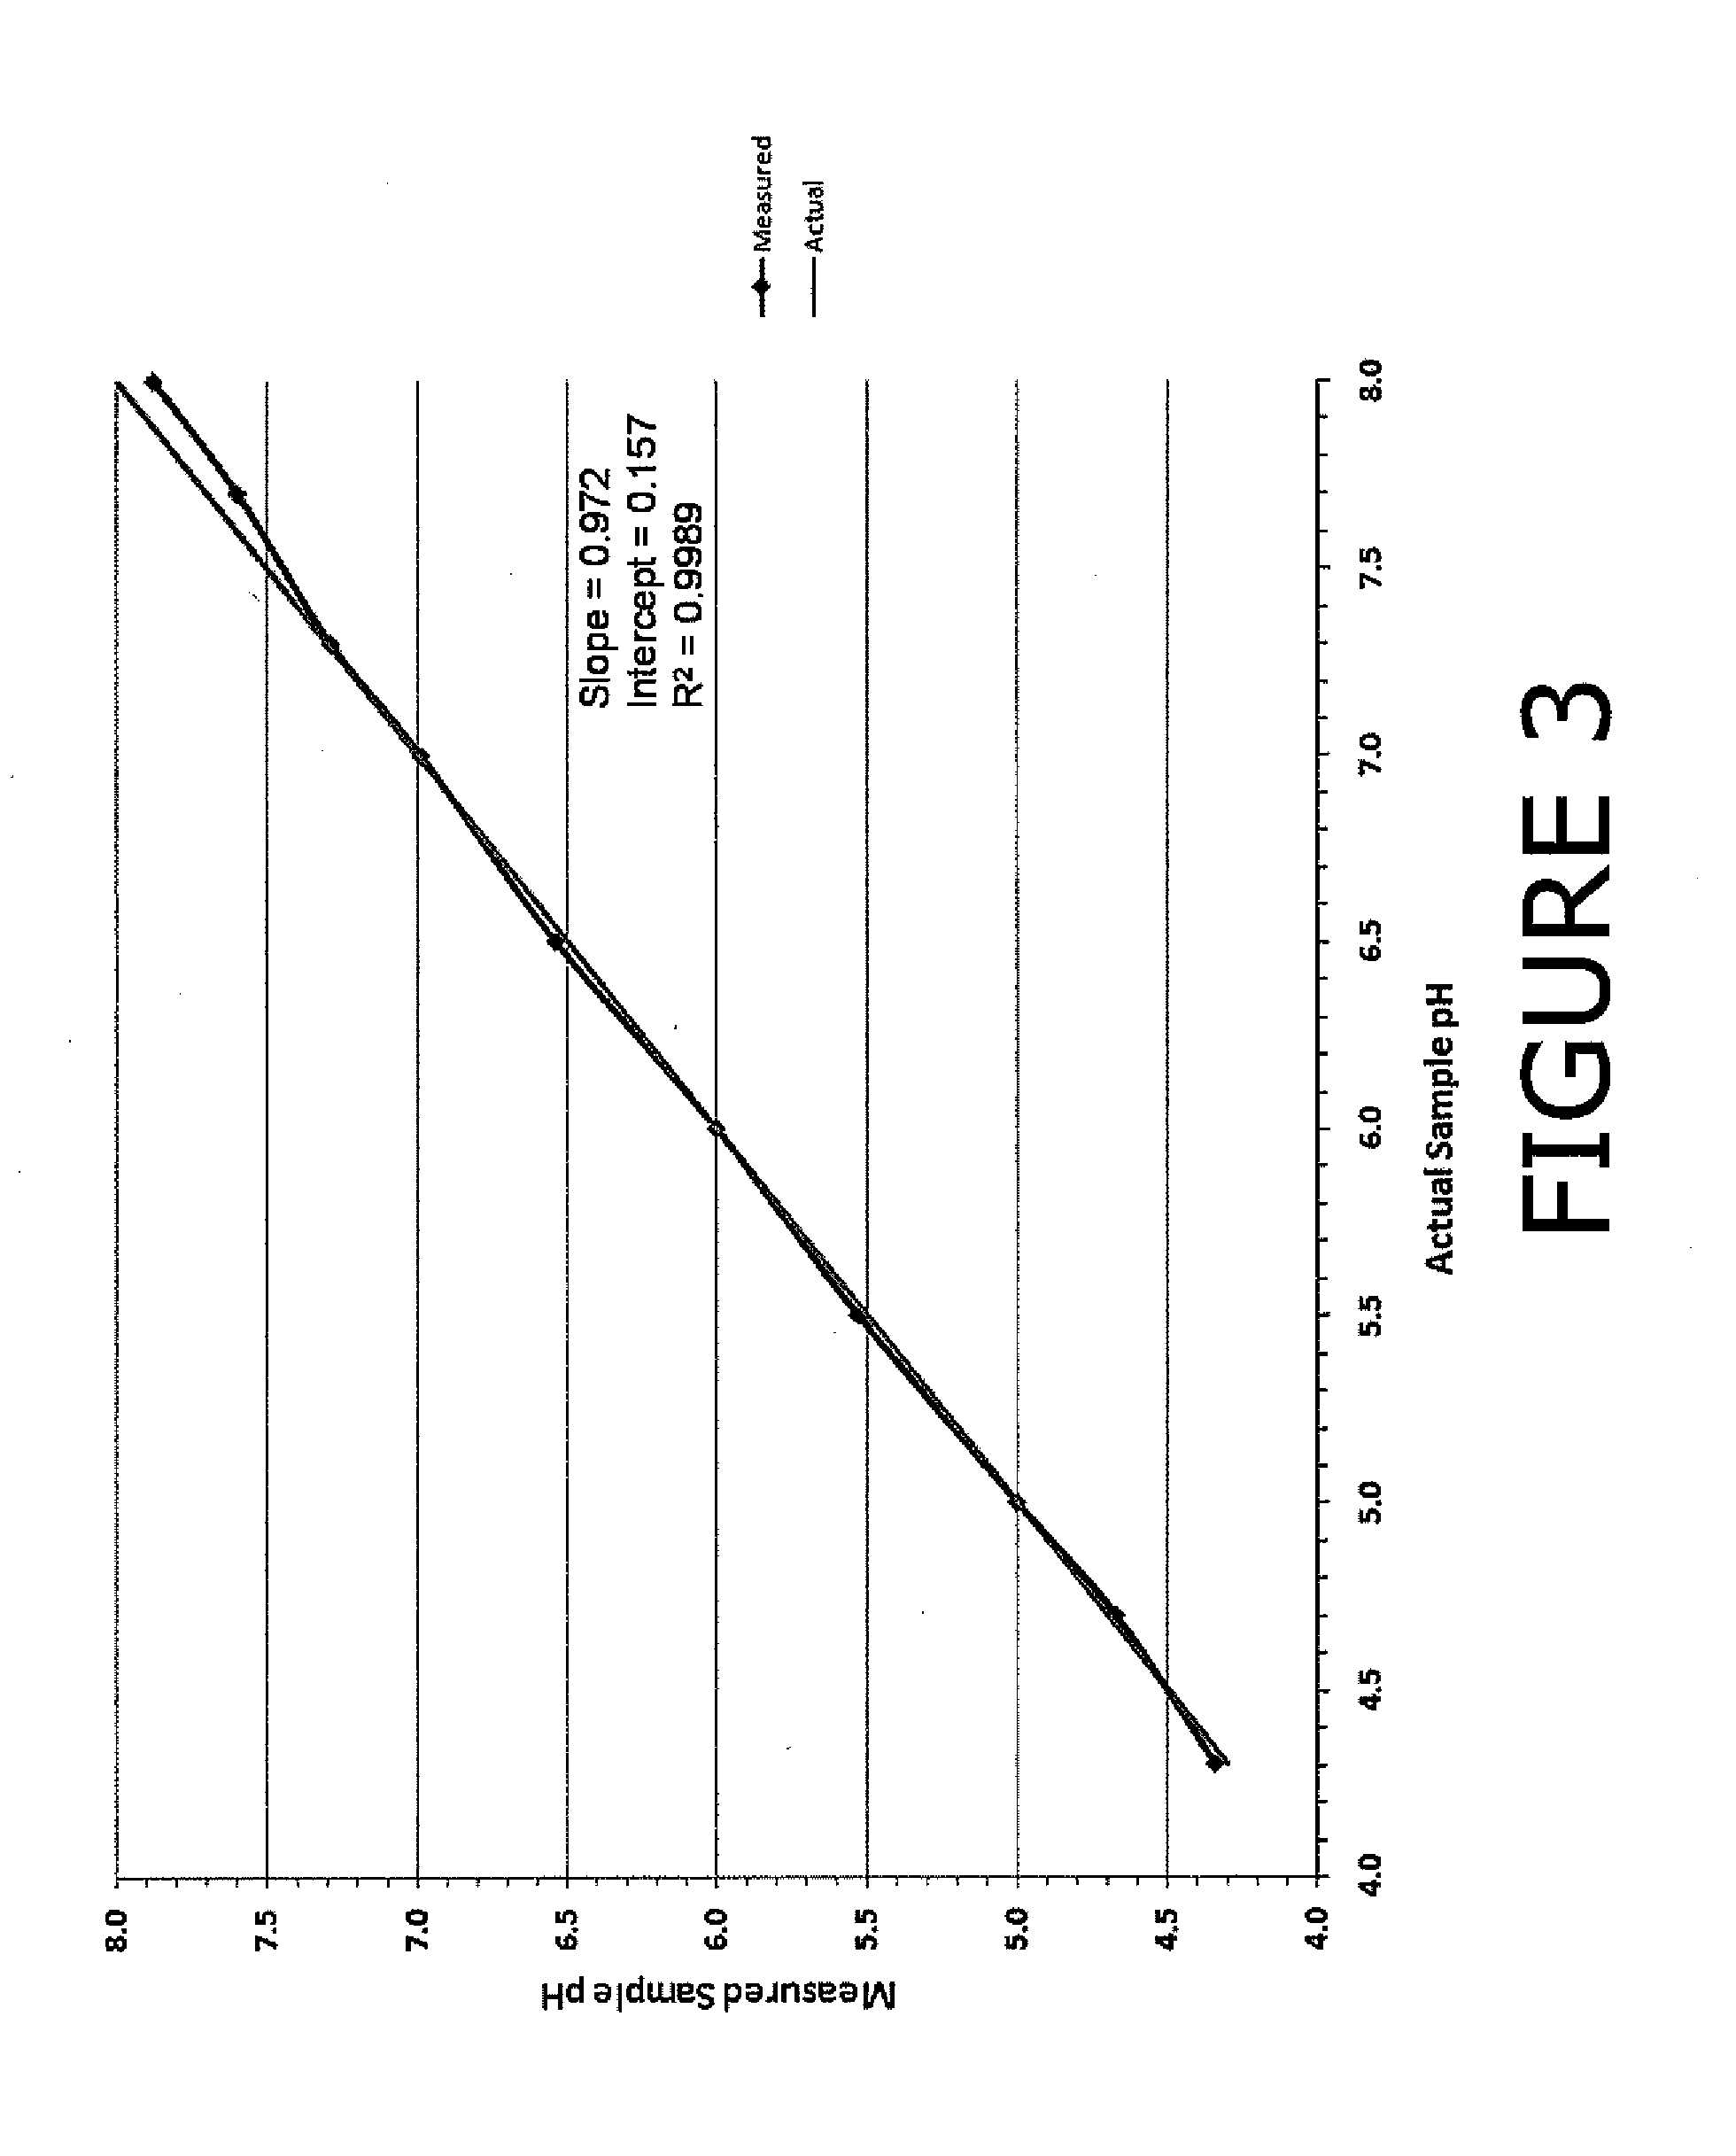 Method and apparatus for determination of system parameters for reducing crude unit corrosion